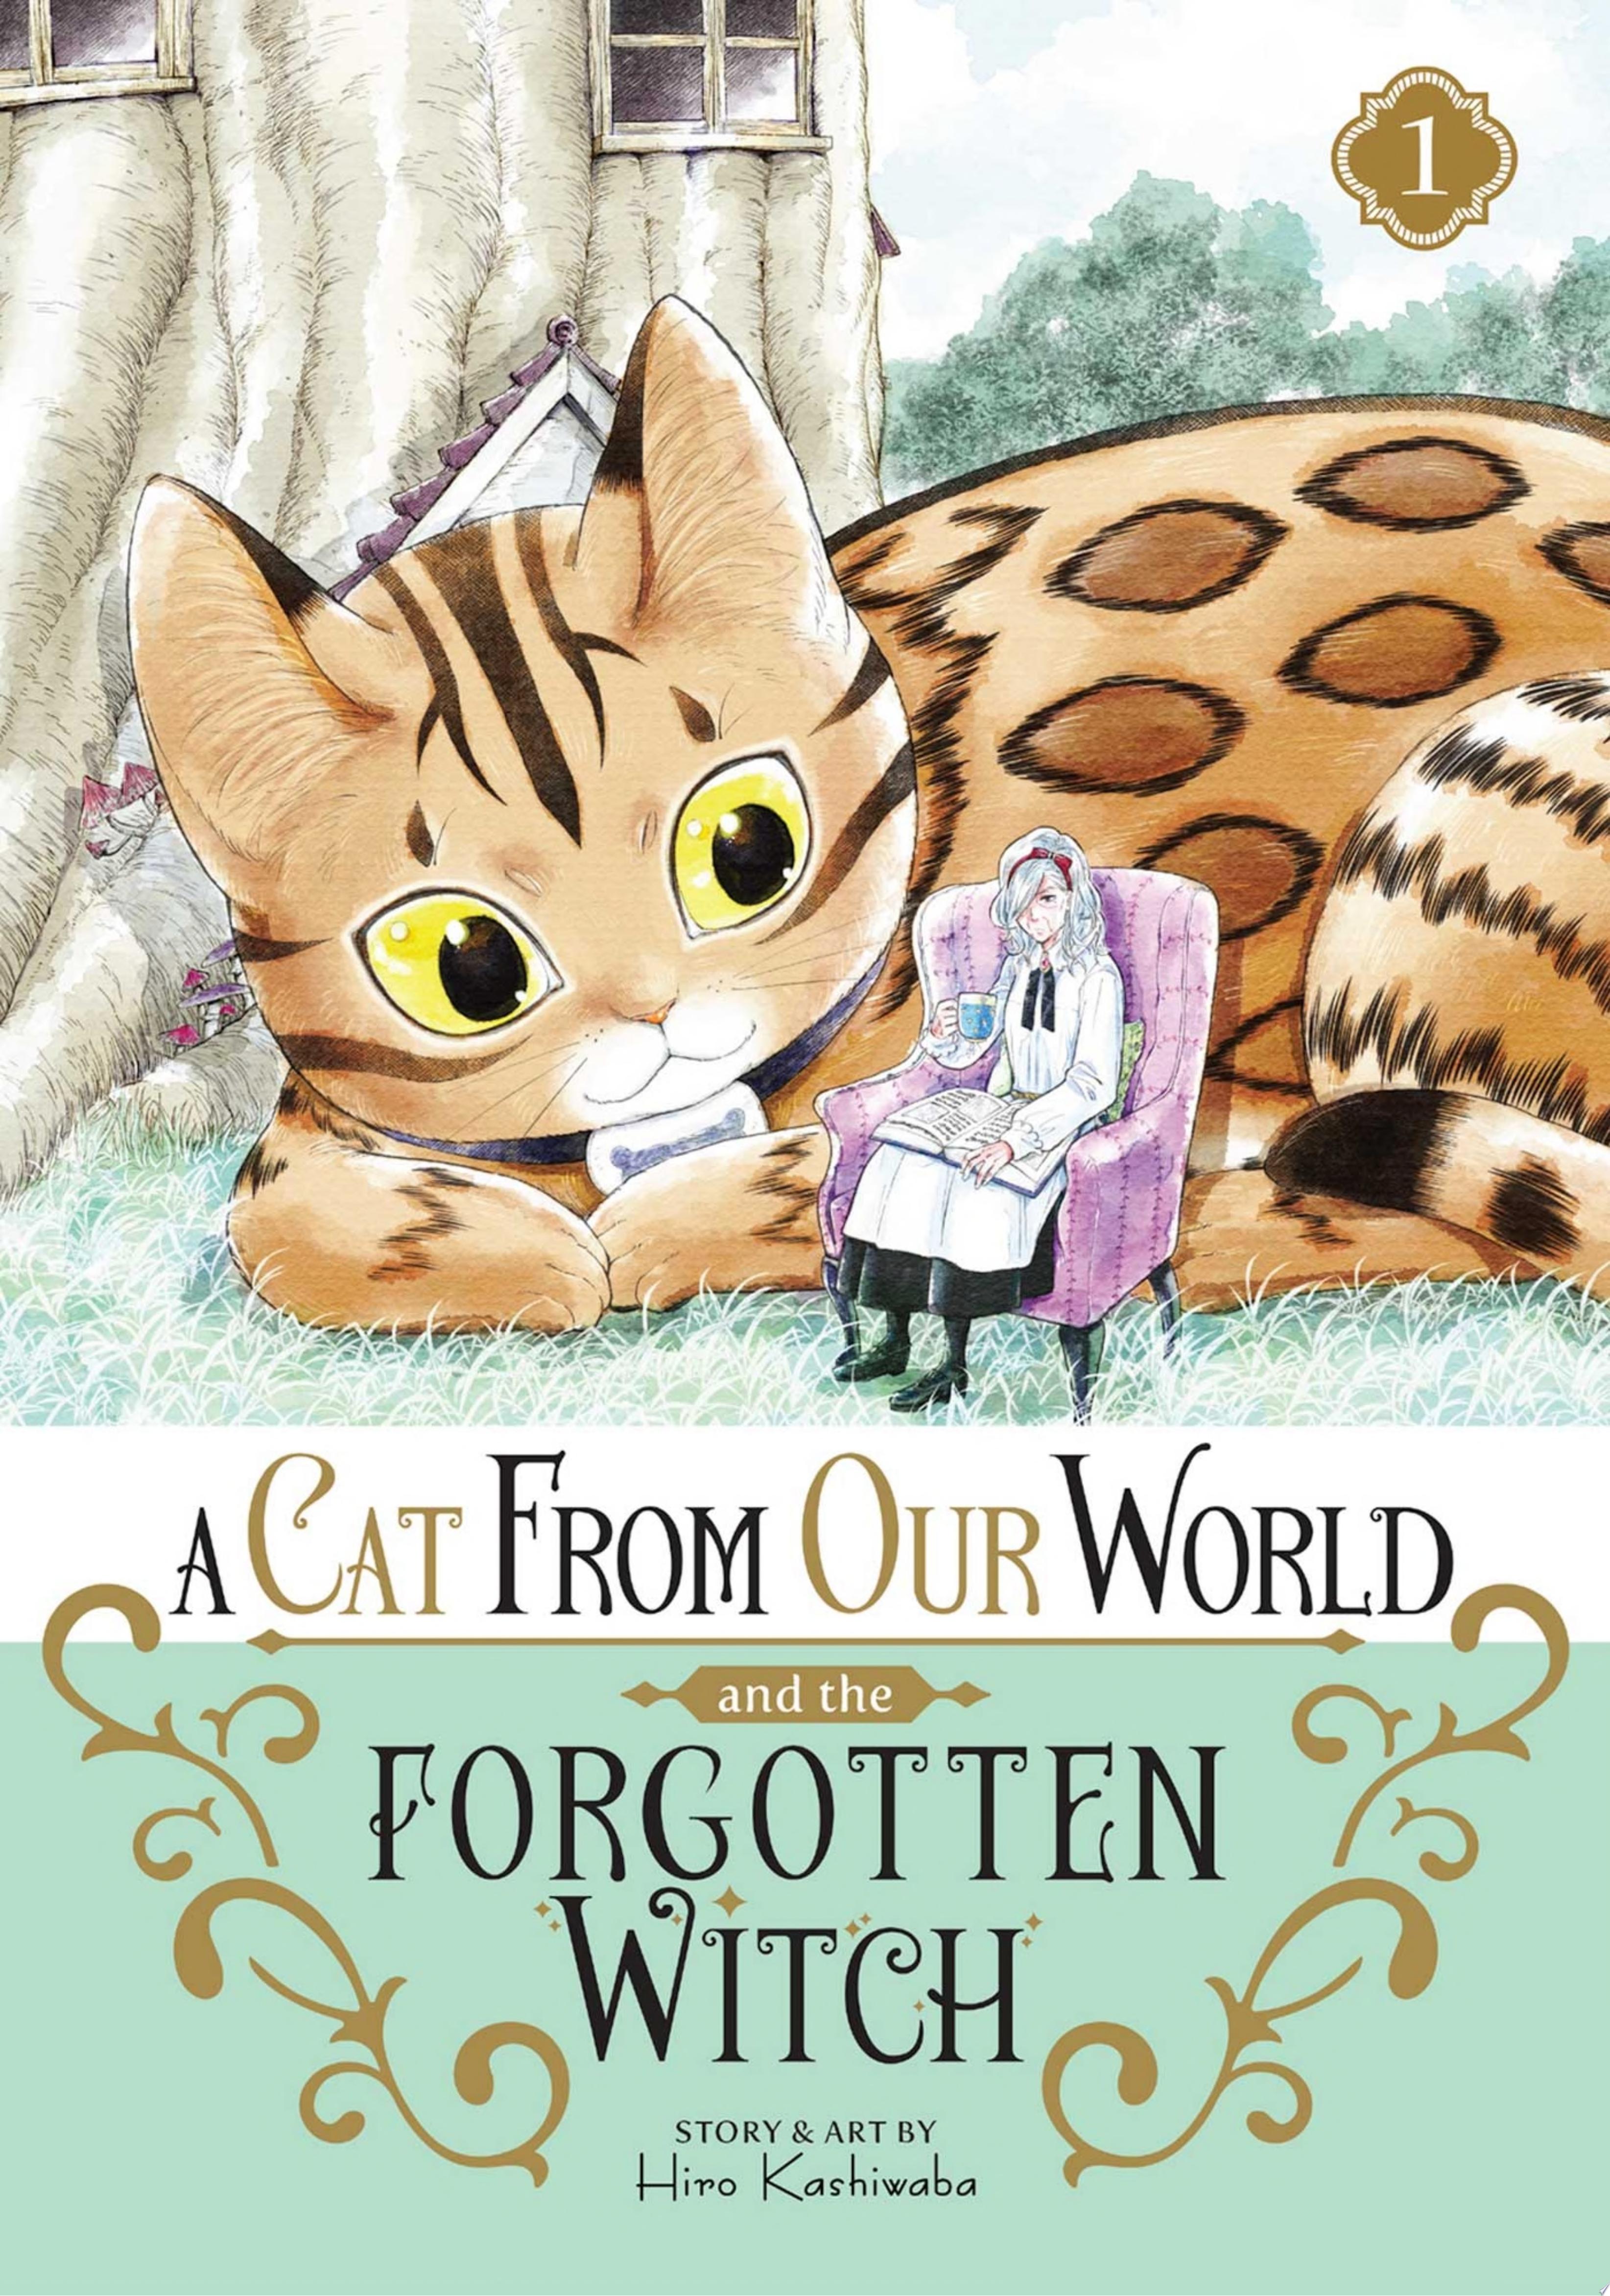 Image for "A Cat from Our World and the Forgotten Witch Vol. 1"